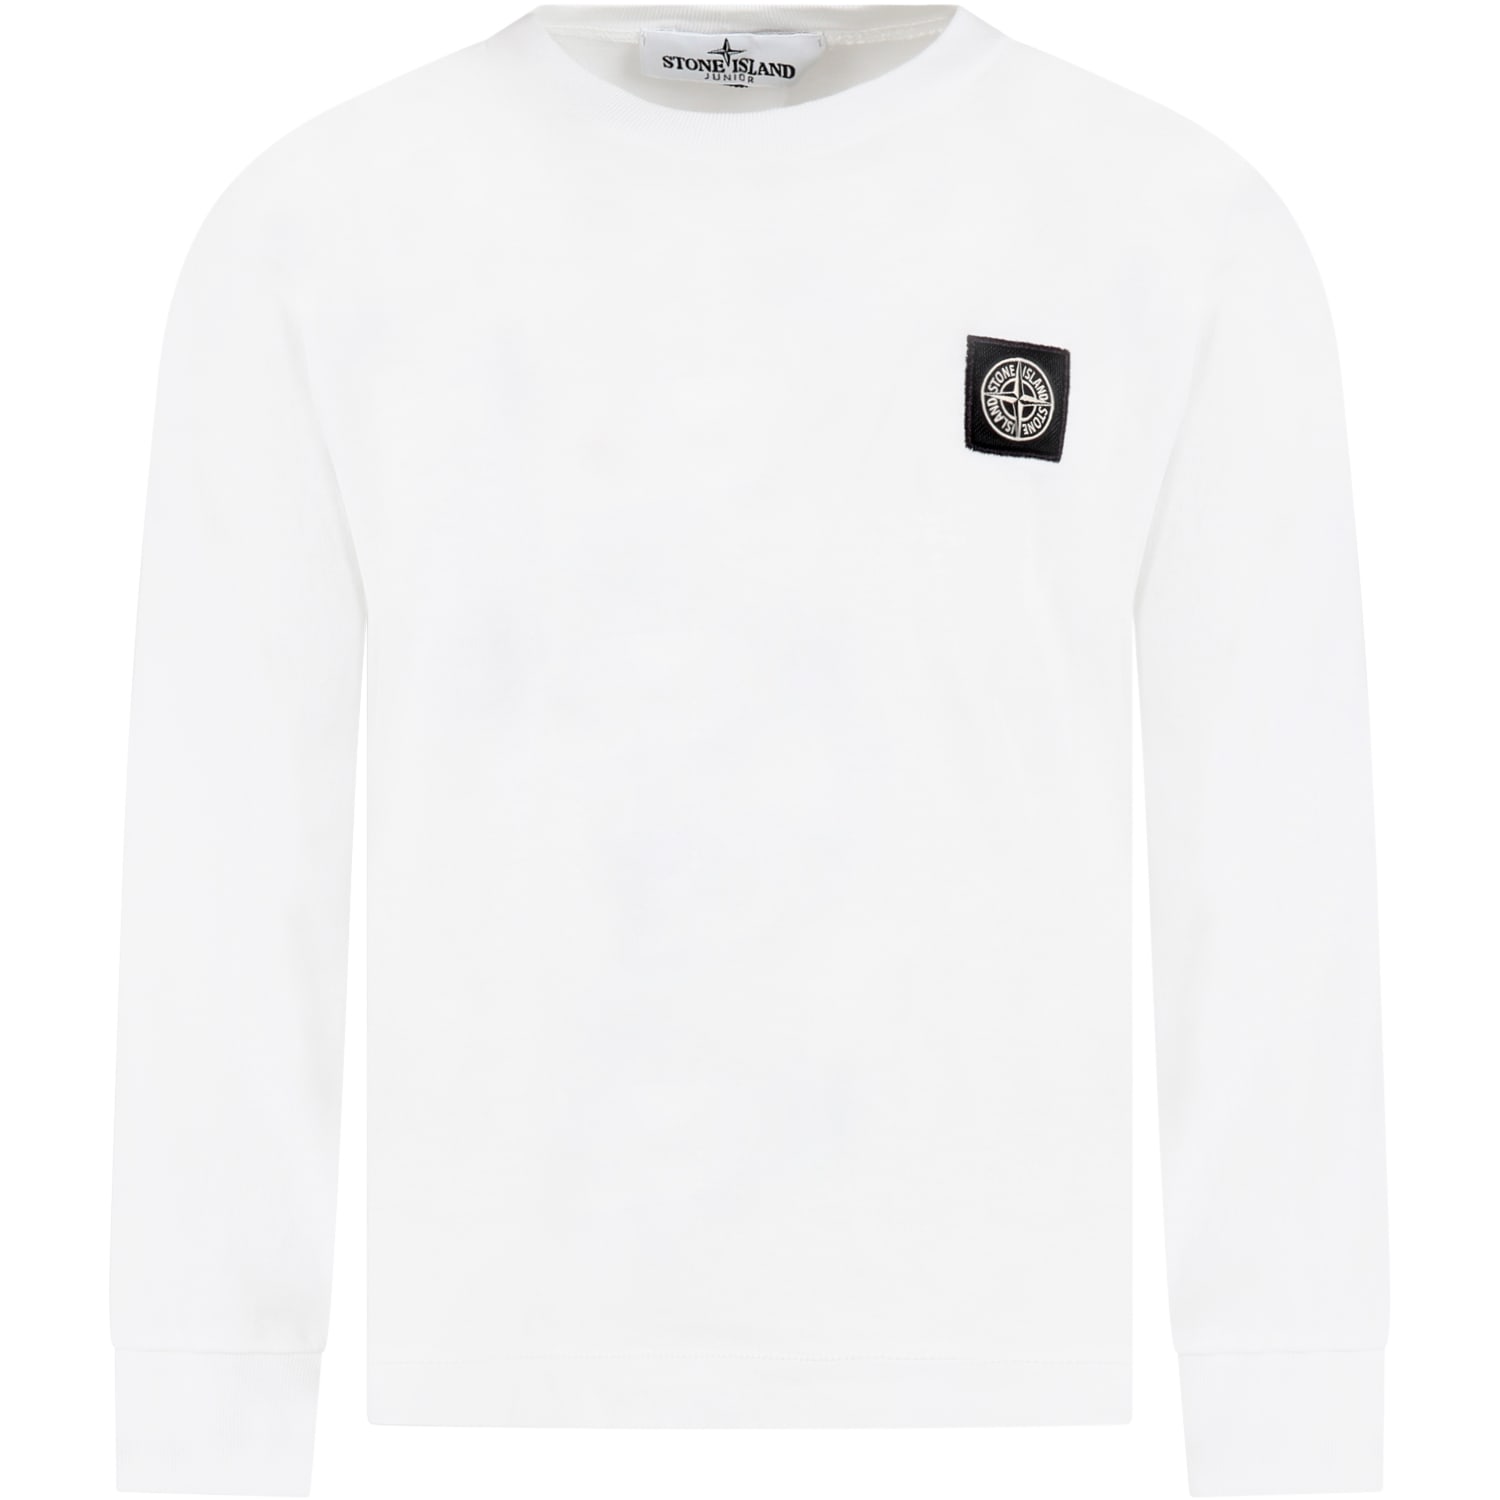 Stone Island Junior White T-shirt Fo Boy With Iconic Compass